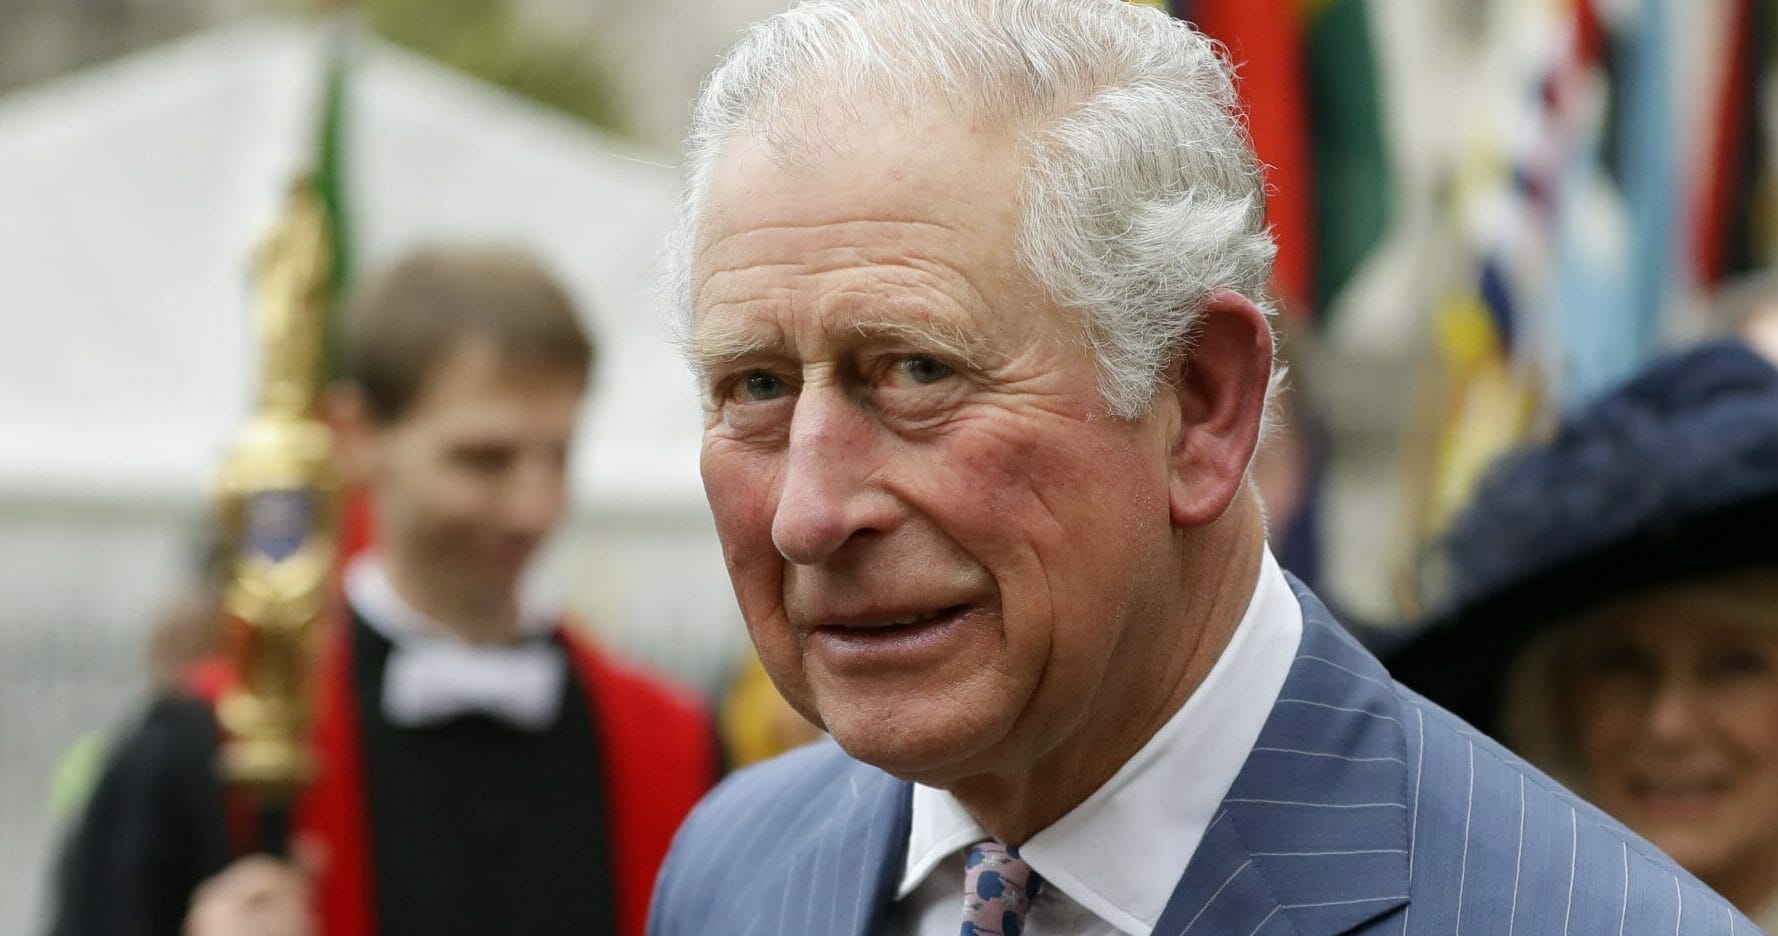 Britain's Prince Charles leaves after attending the annual Commonwealth Day service at Westminster Abbey in London on March 9, 2020.